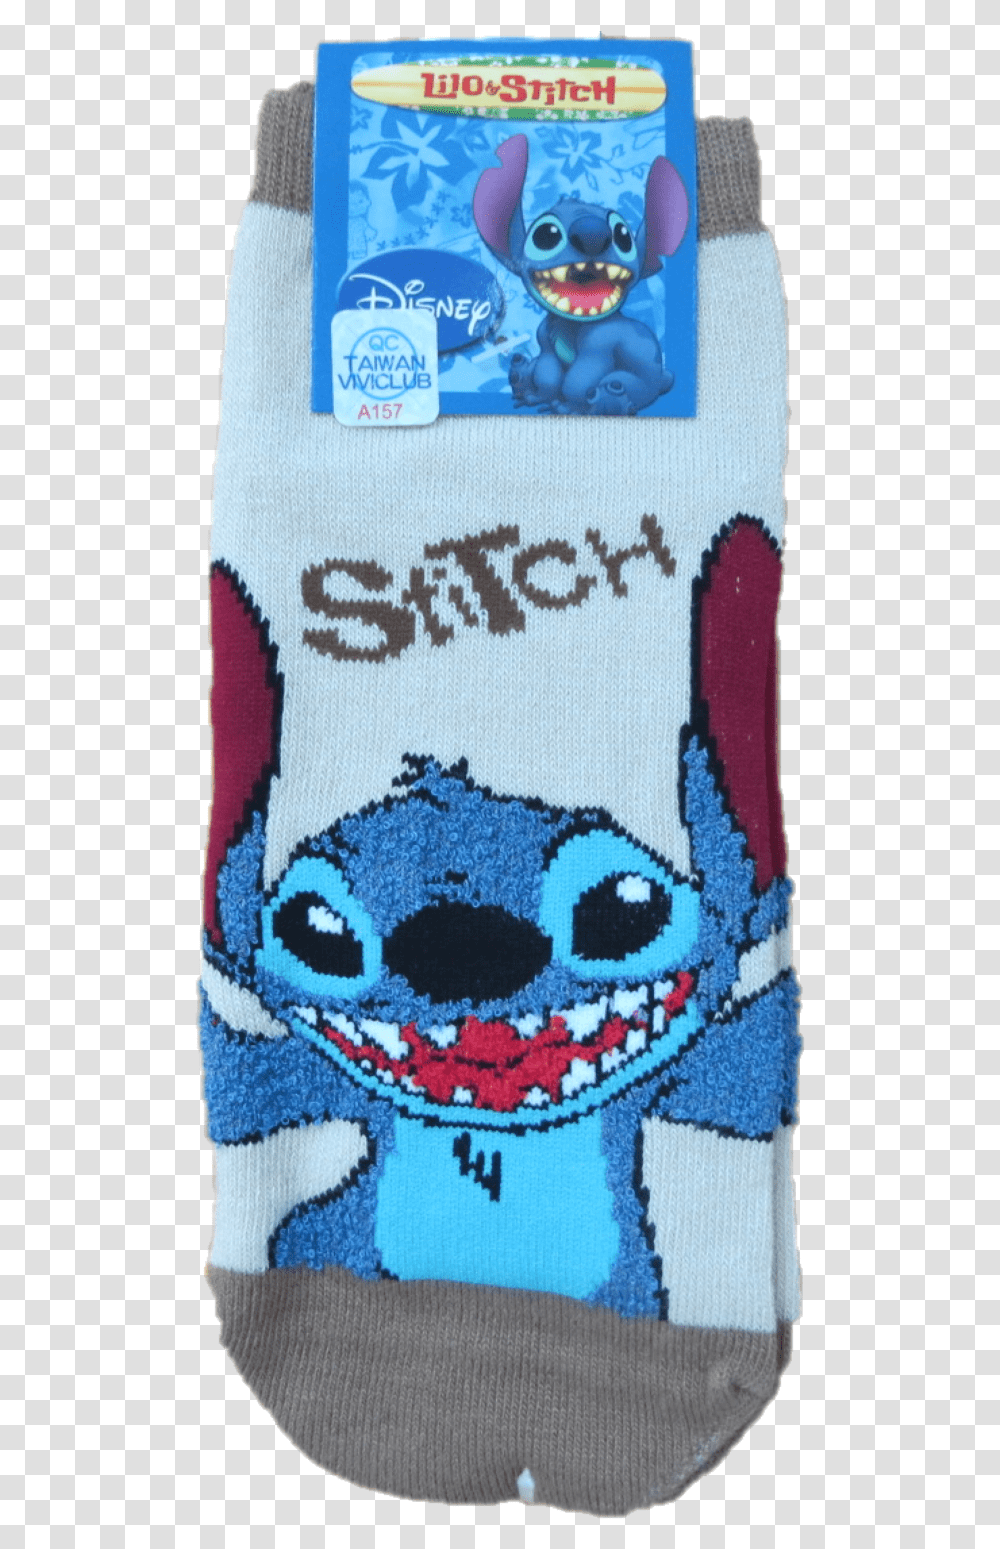 Lilo And Stitch, Pillow, Cushion, Rug, Blanket Transparent Png